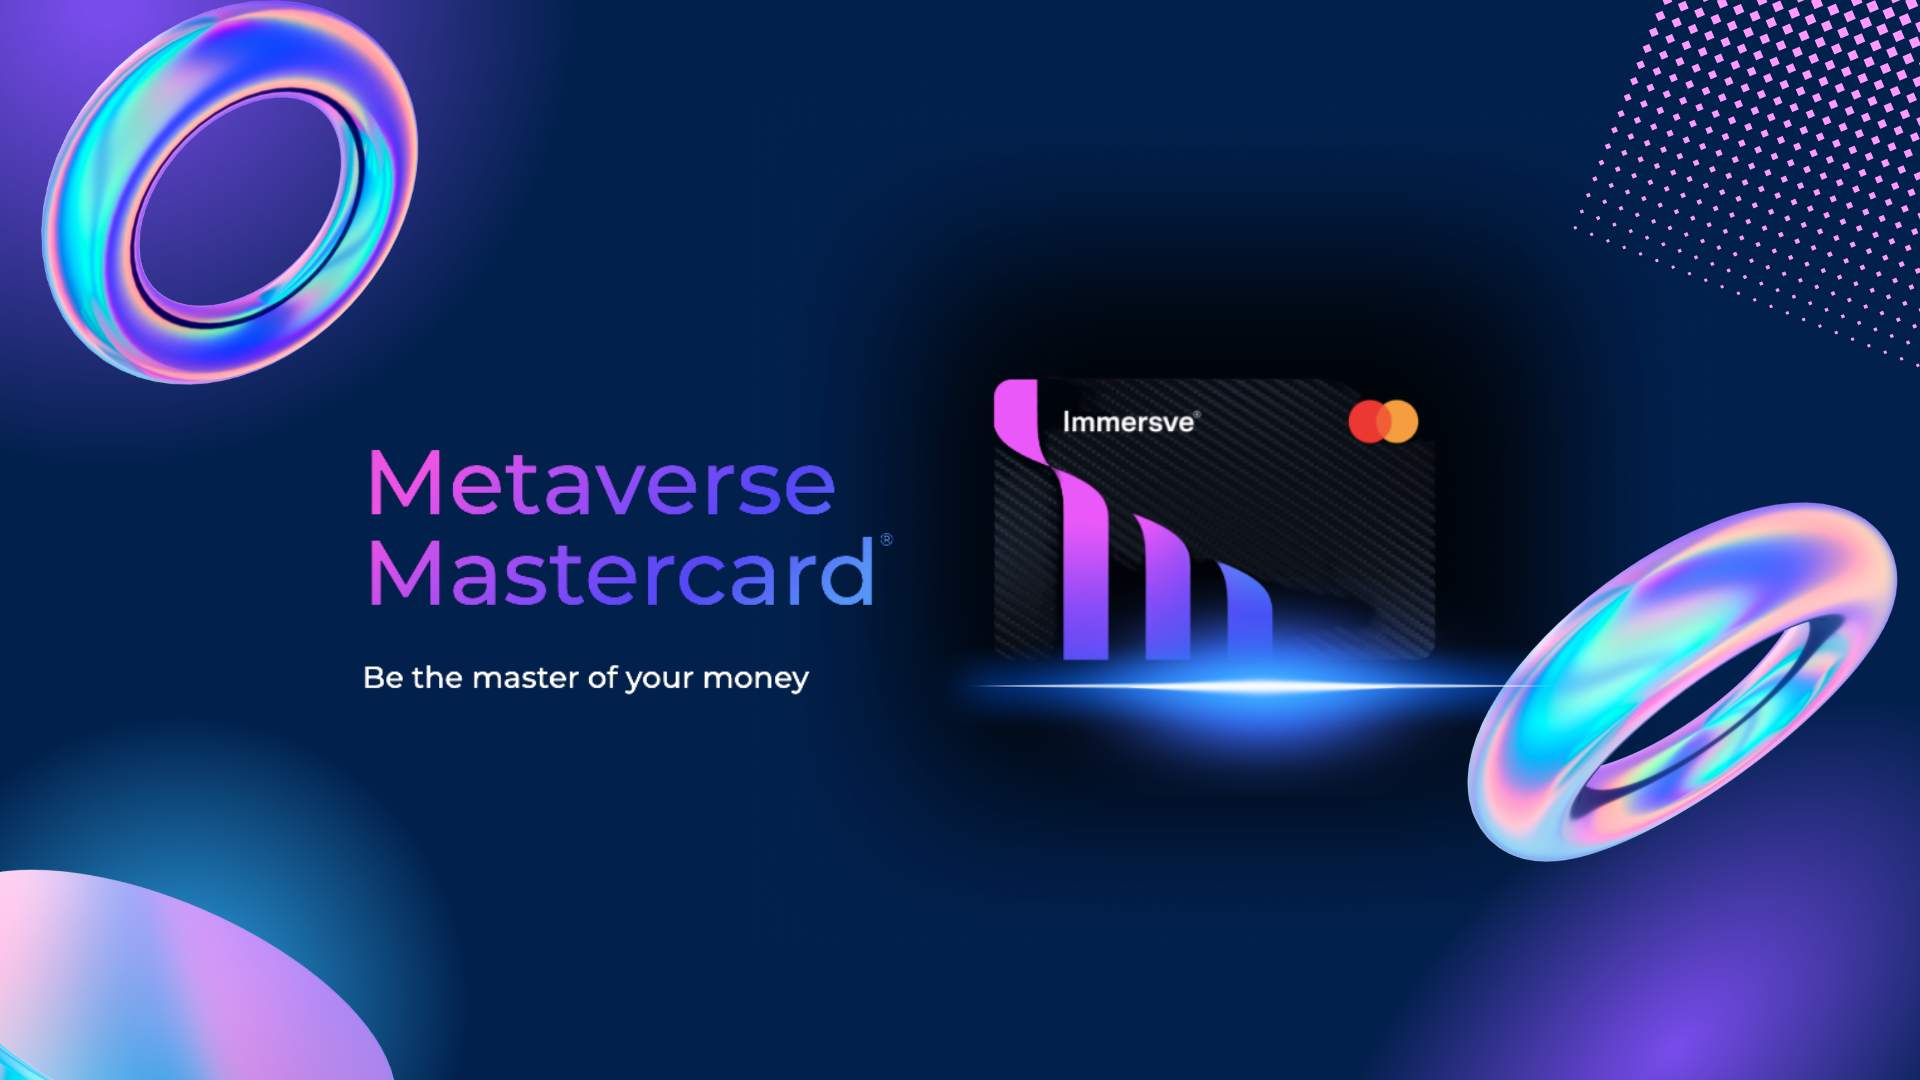 Metaverse mastercard by Immersve to support global payments in Web 3